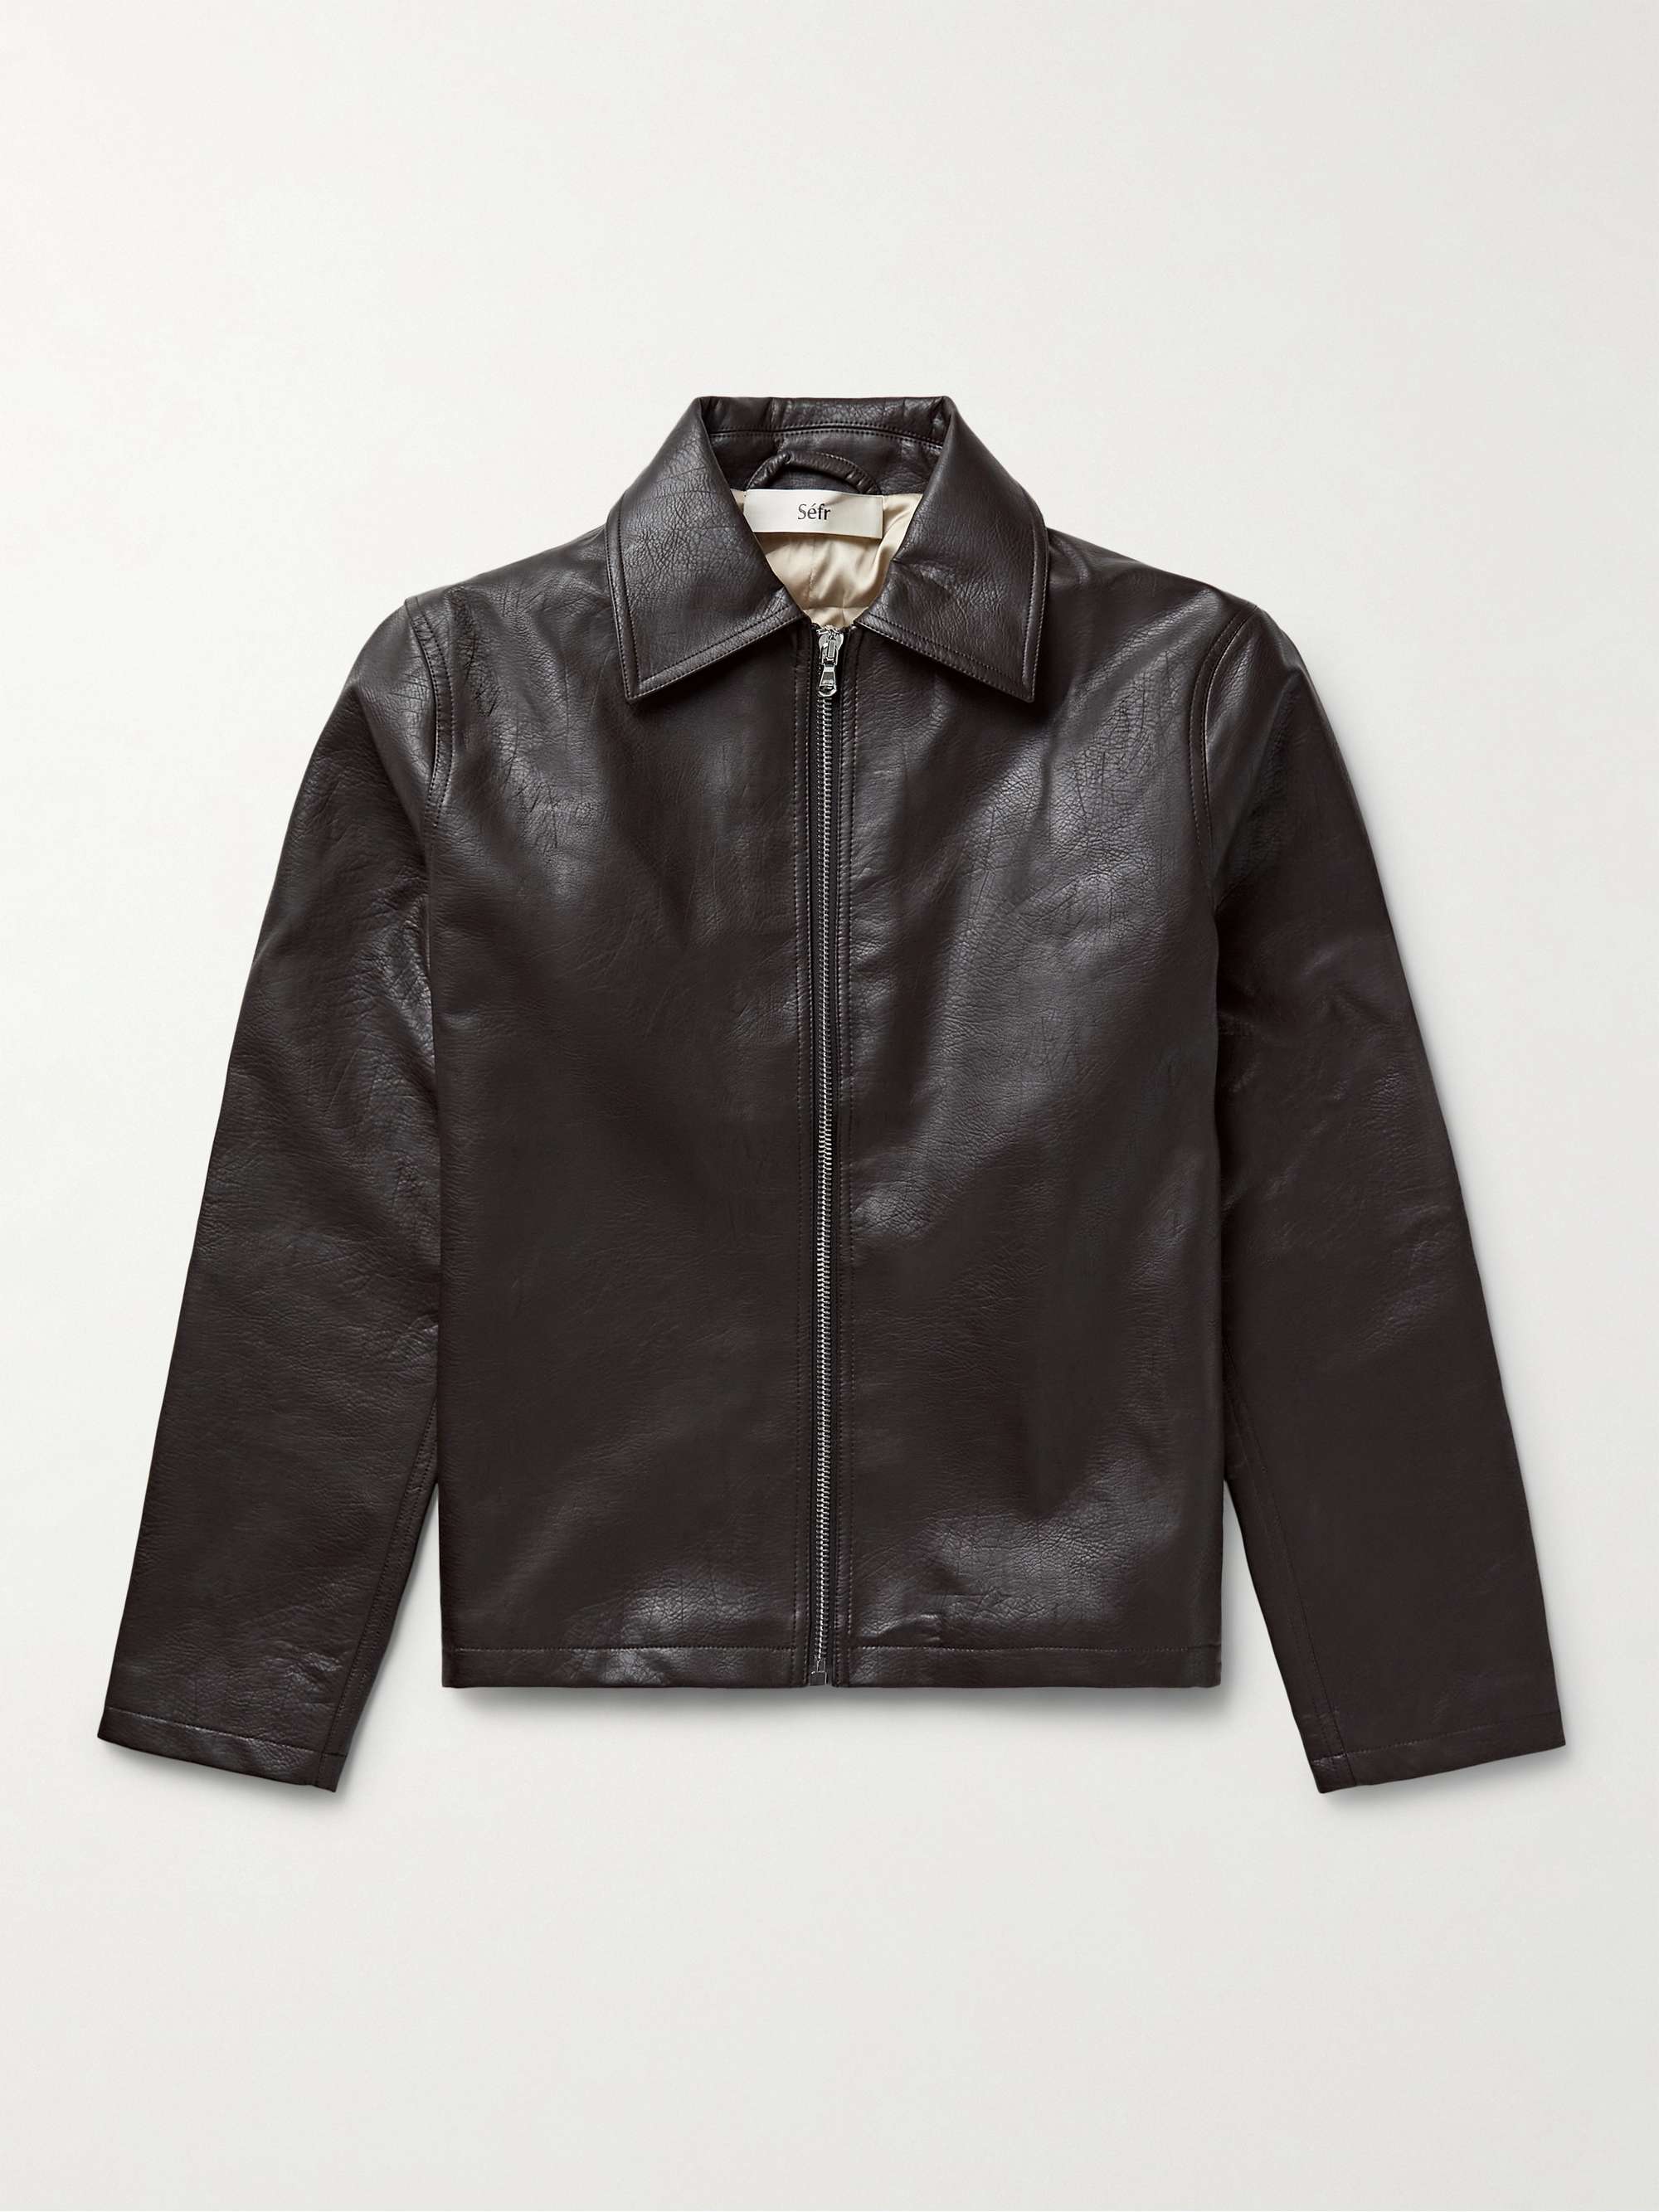 SÉFR Truth Faux Leather Jacket